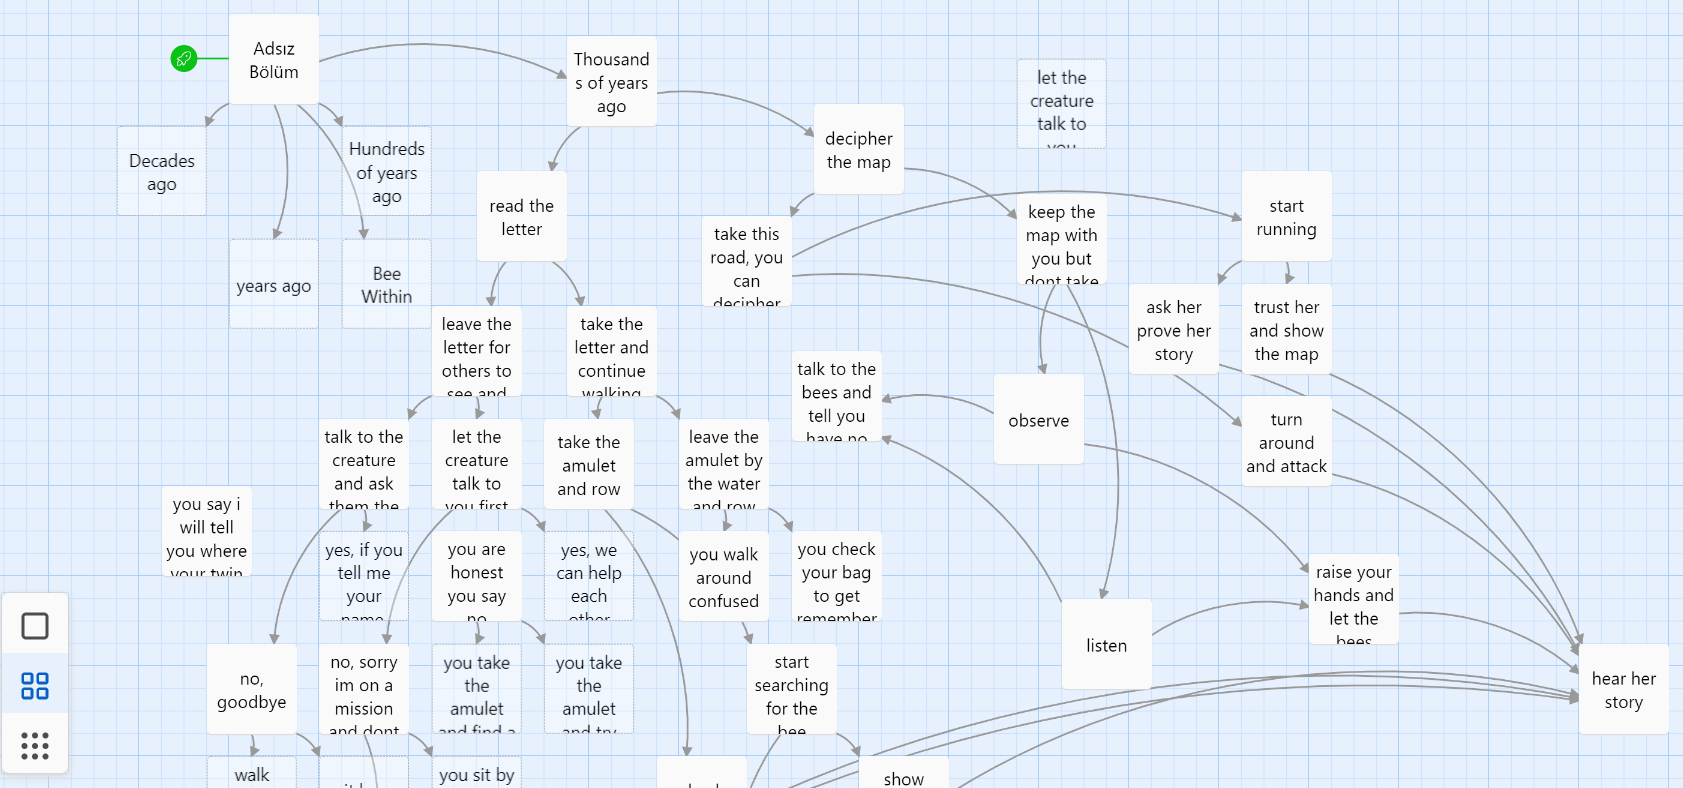 “The twine map of text based story, reachable from Bee Within.”